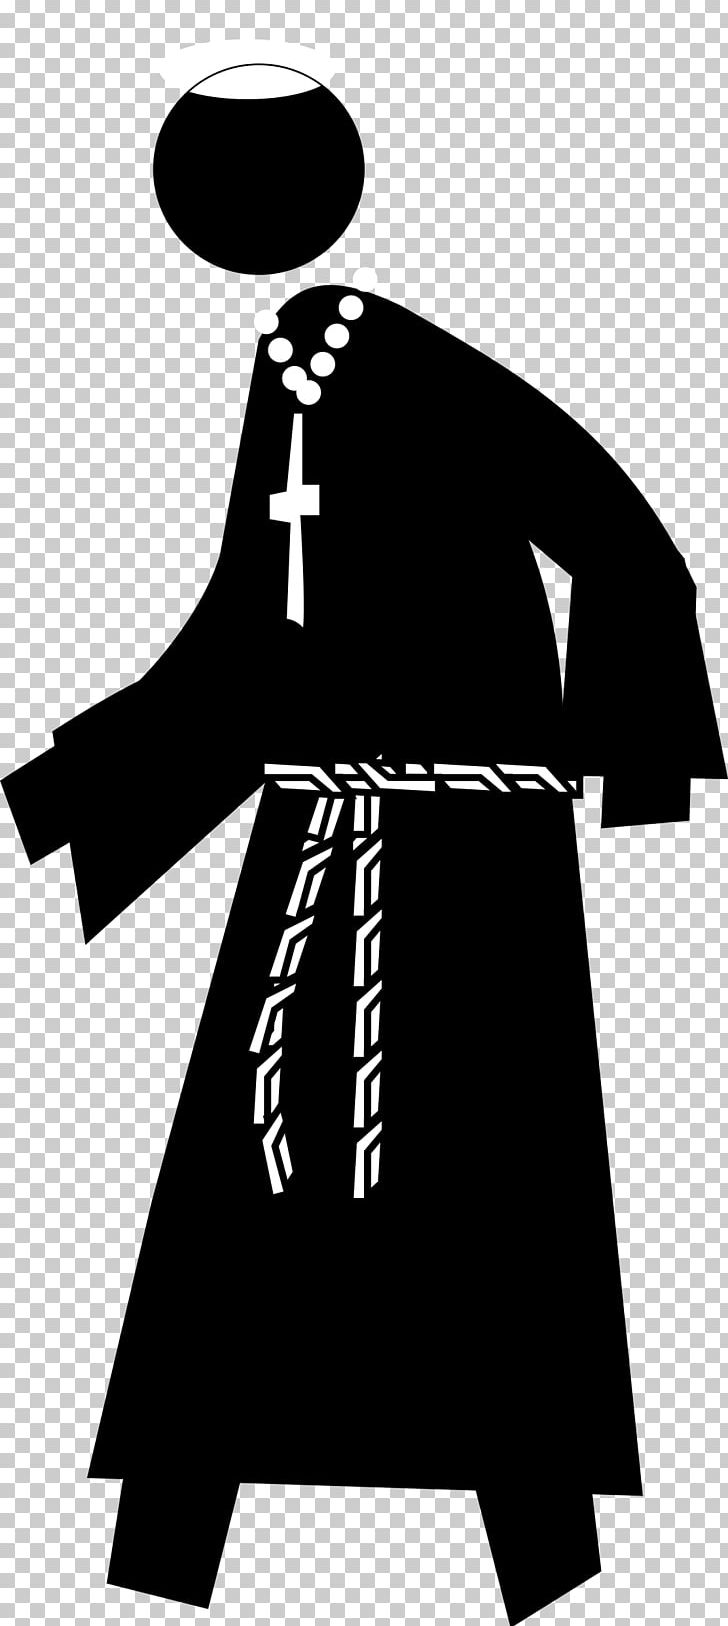 Monk Cartoon PNG, Clipart, Black, Black And White, Cartoon, Christianity, Clergy Free PNG Download